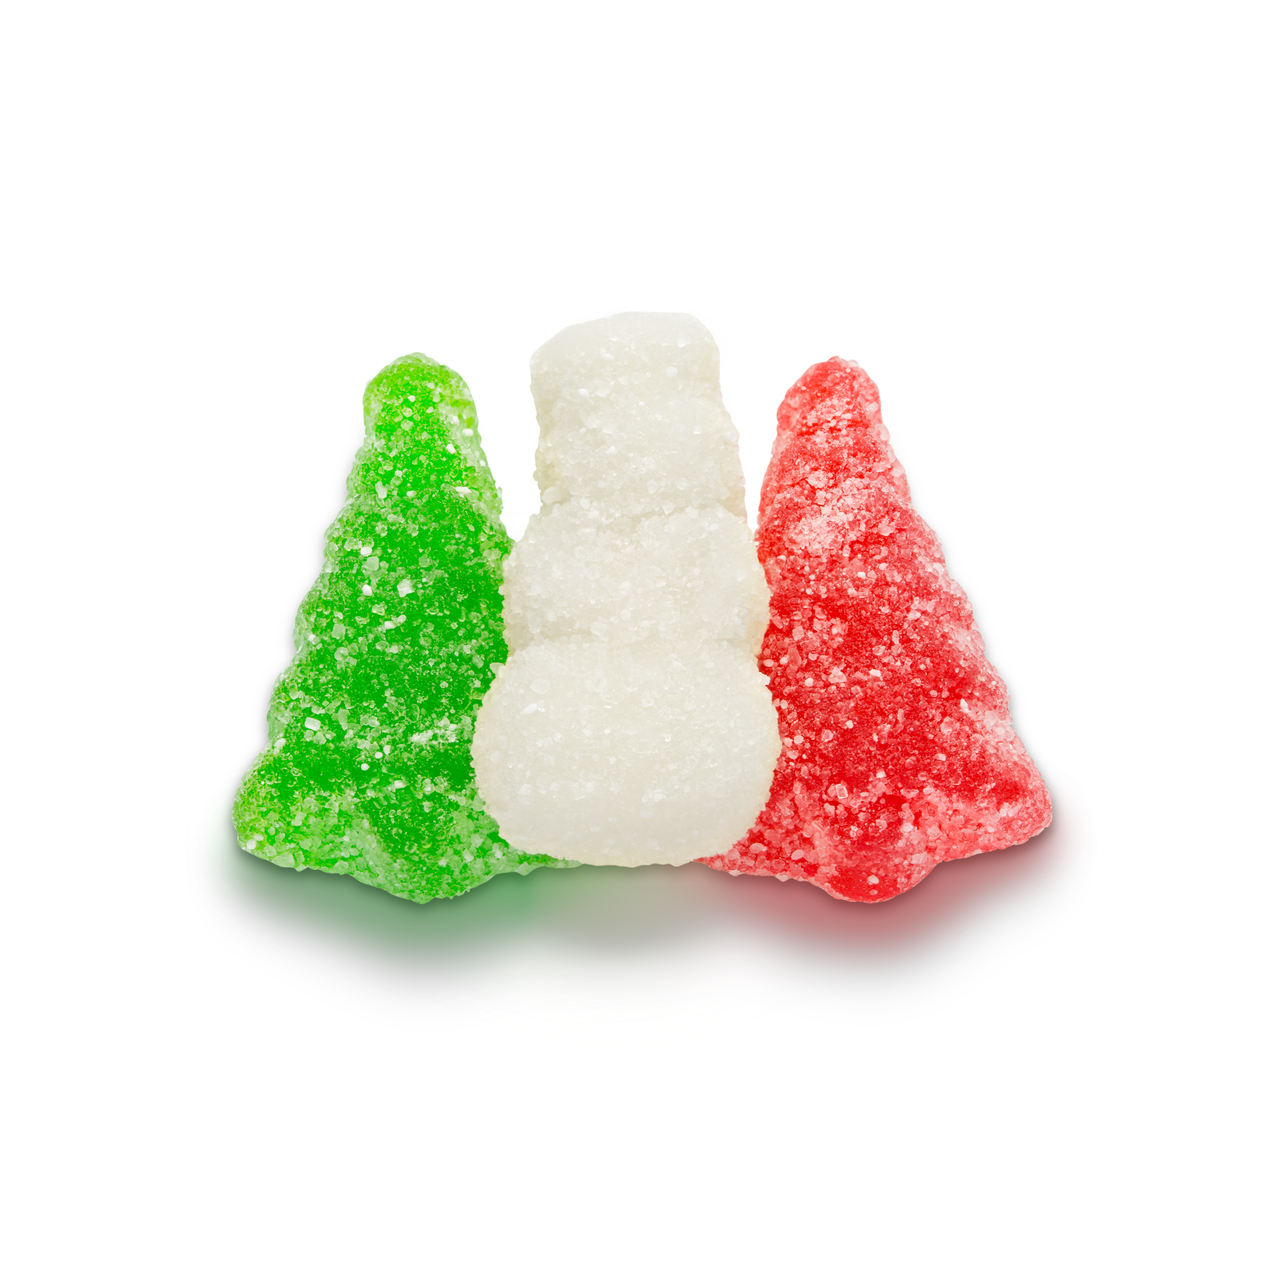 Festive green tree, white snowman and red tree gummies dusted with sugar 